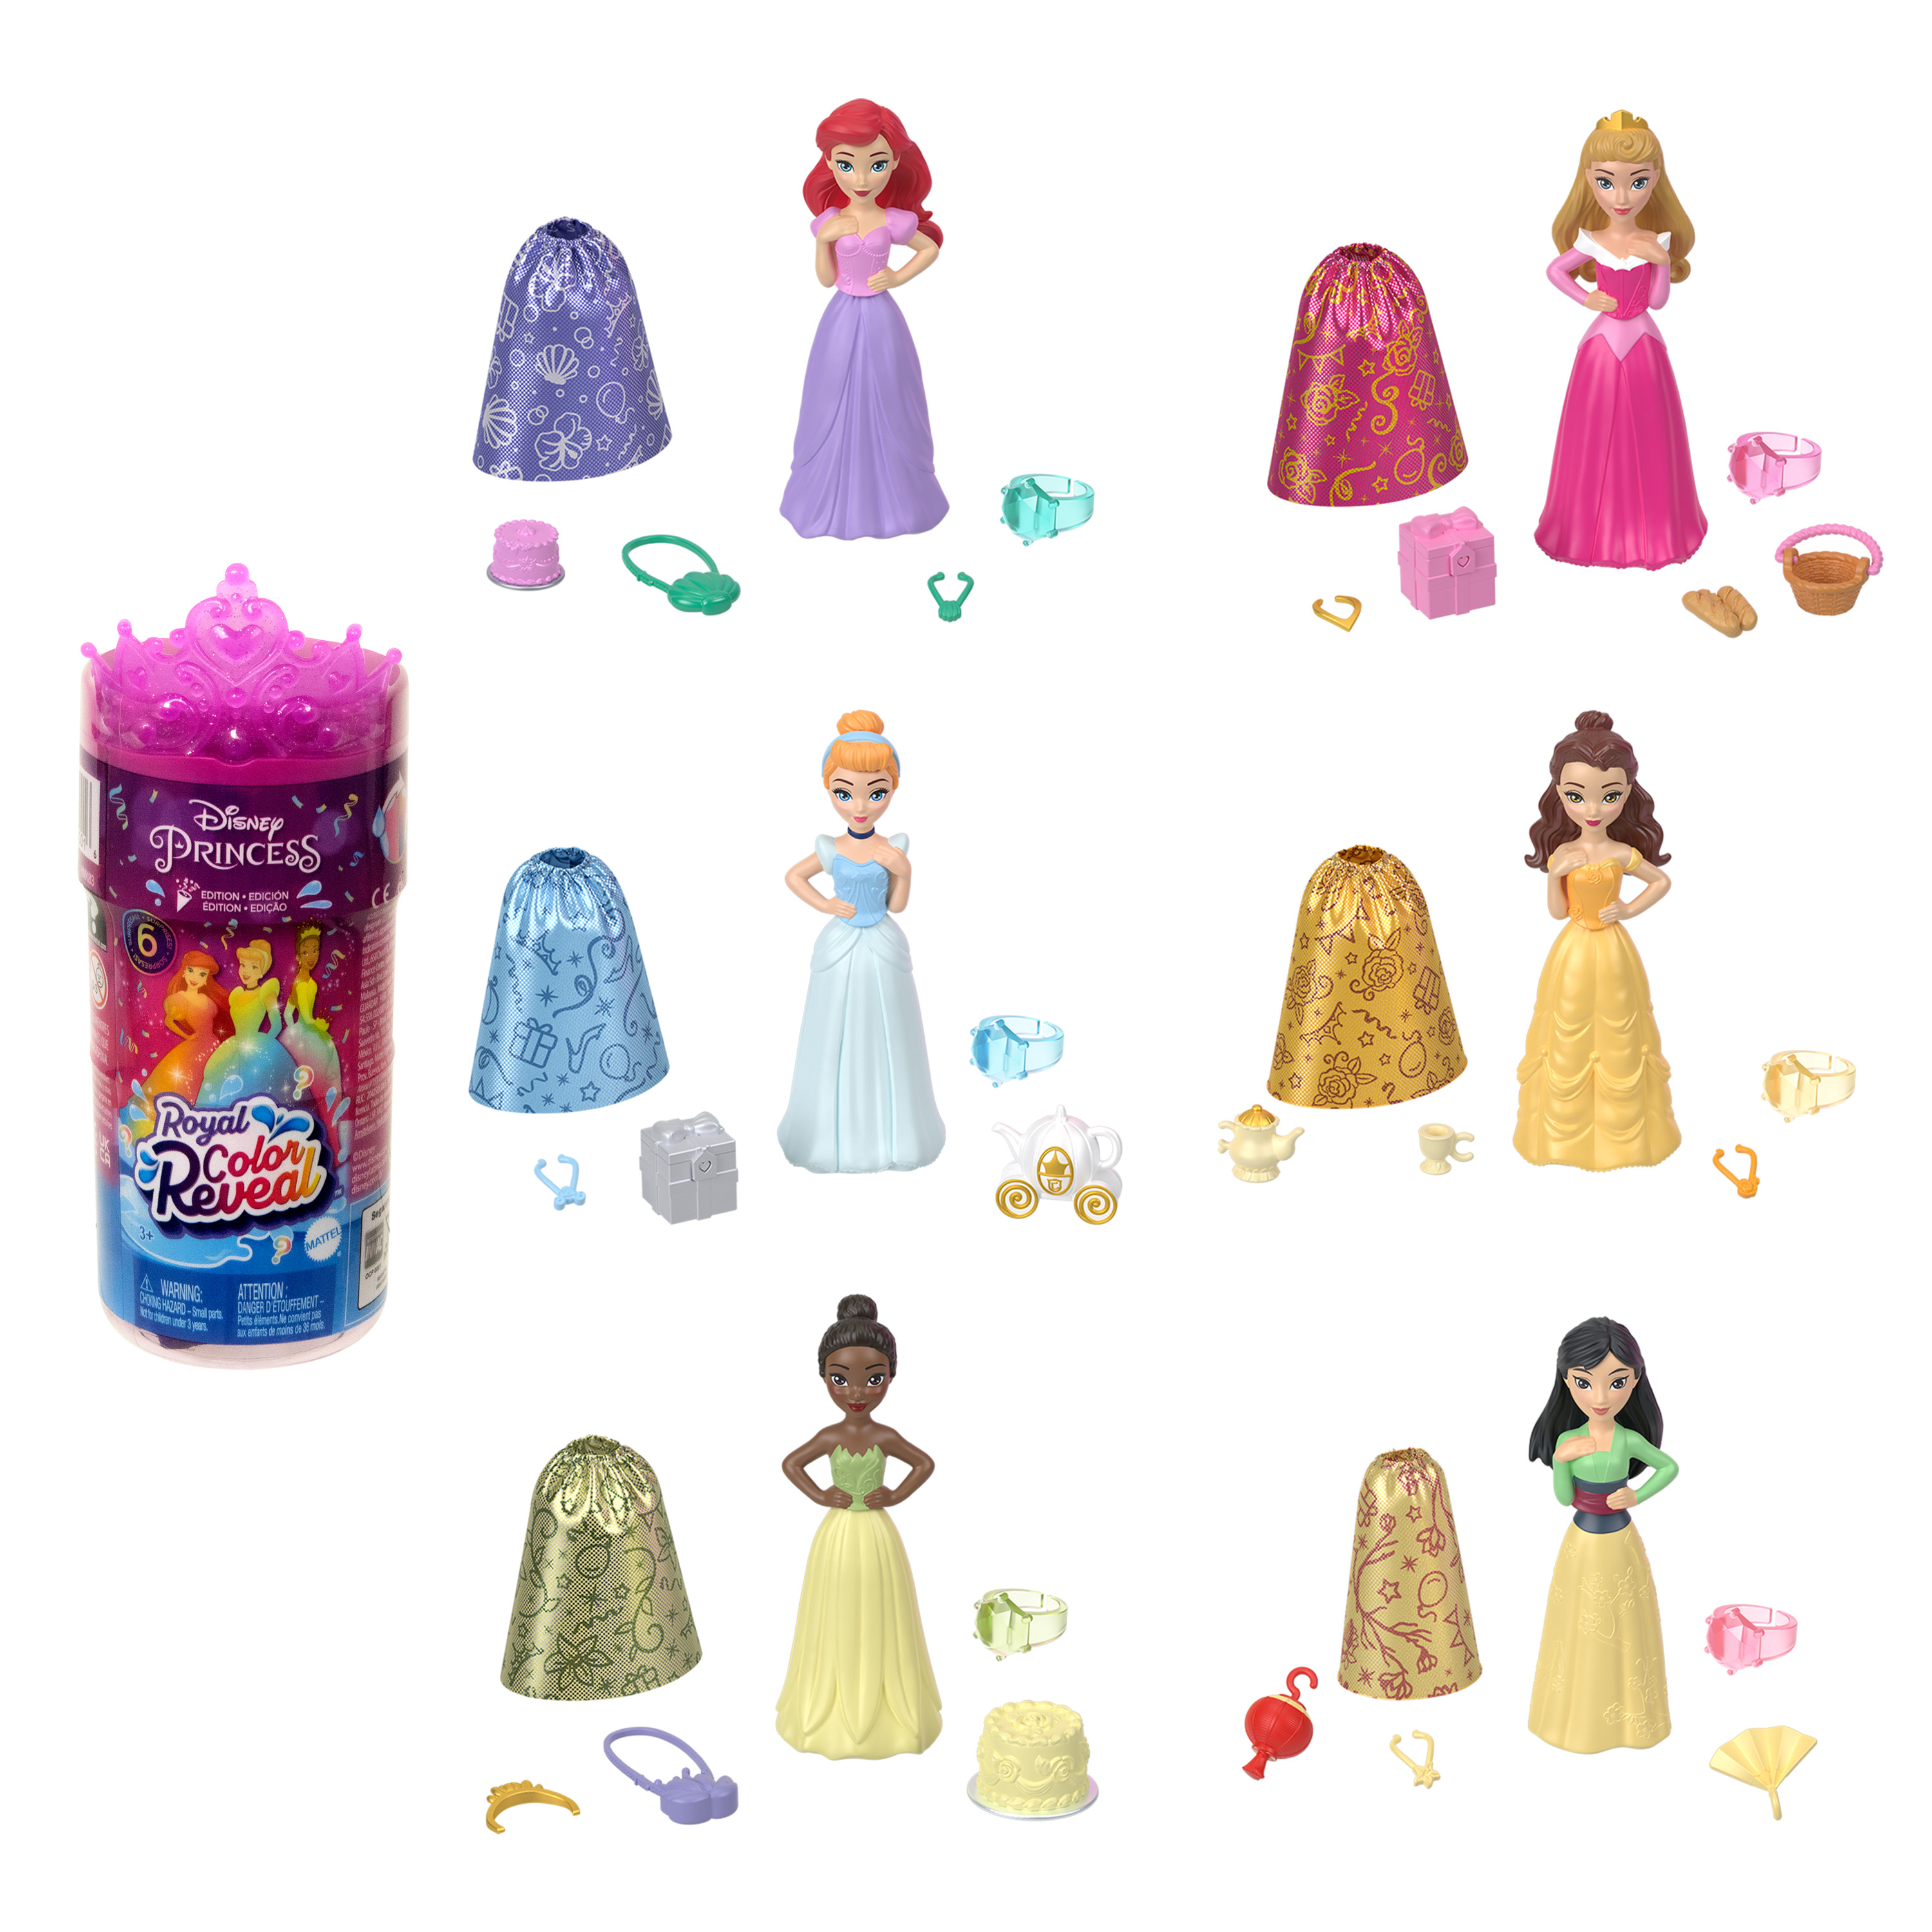 Disney Prinzessin Small Dolls Royal Color Reveal Sortiment Welle 2 HMK83